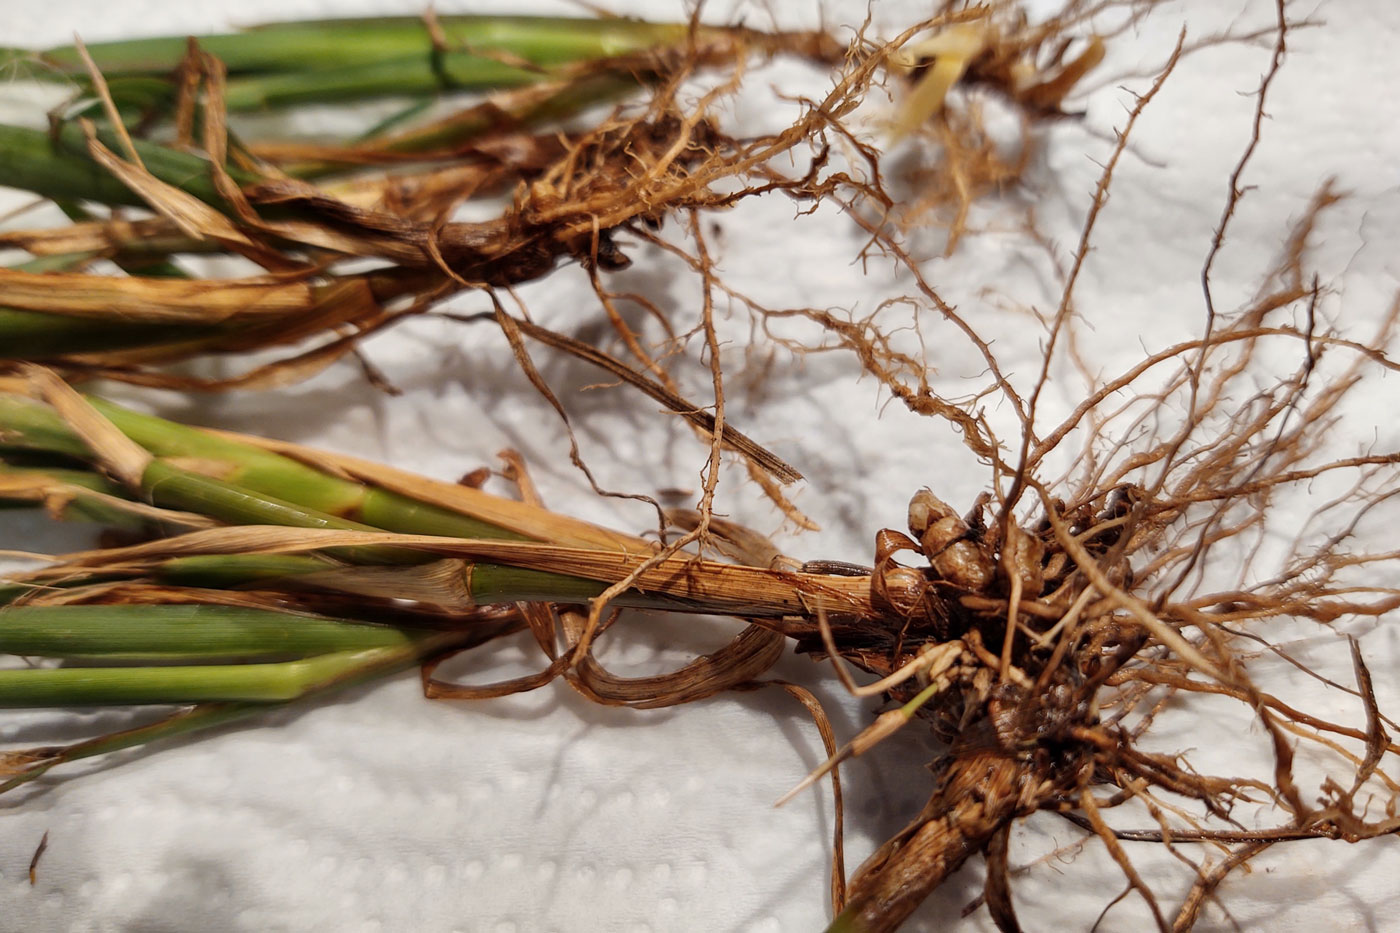 One way to distinguish knotroot foxtail from annual foxtail is to look at the plant roots, which have “knotty” rhizomes. (Photo courtesy of Kevin Bradley.)